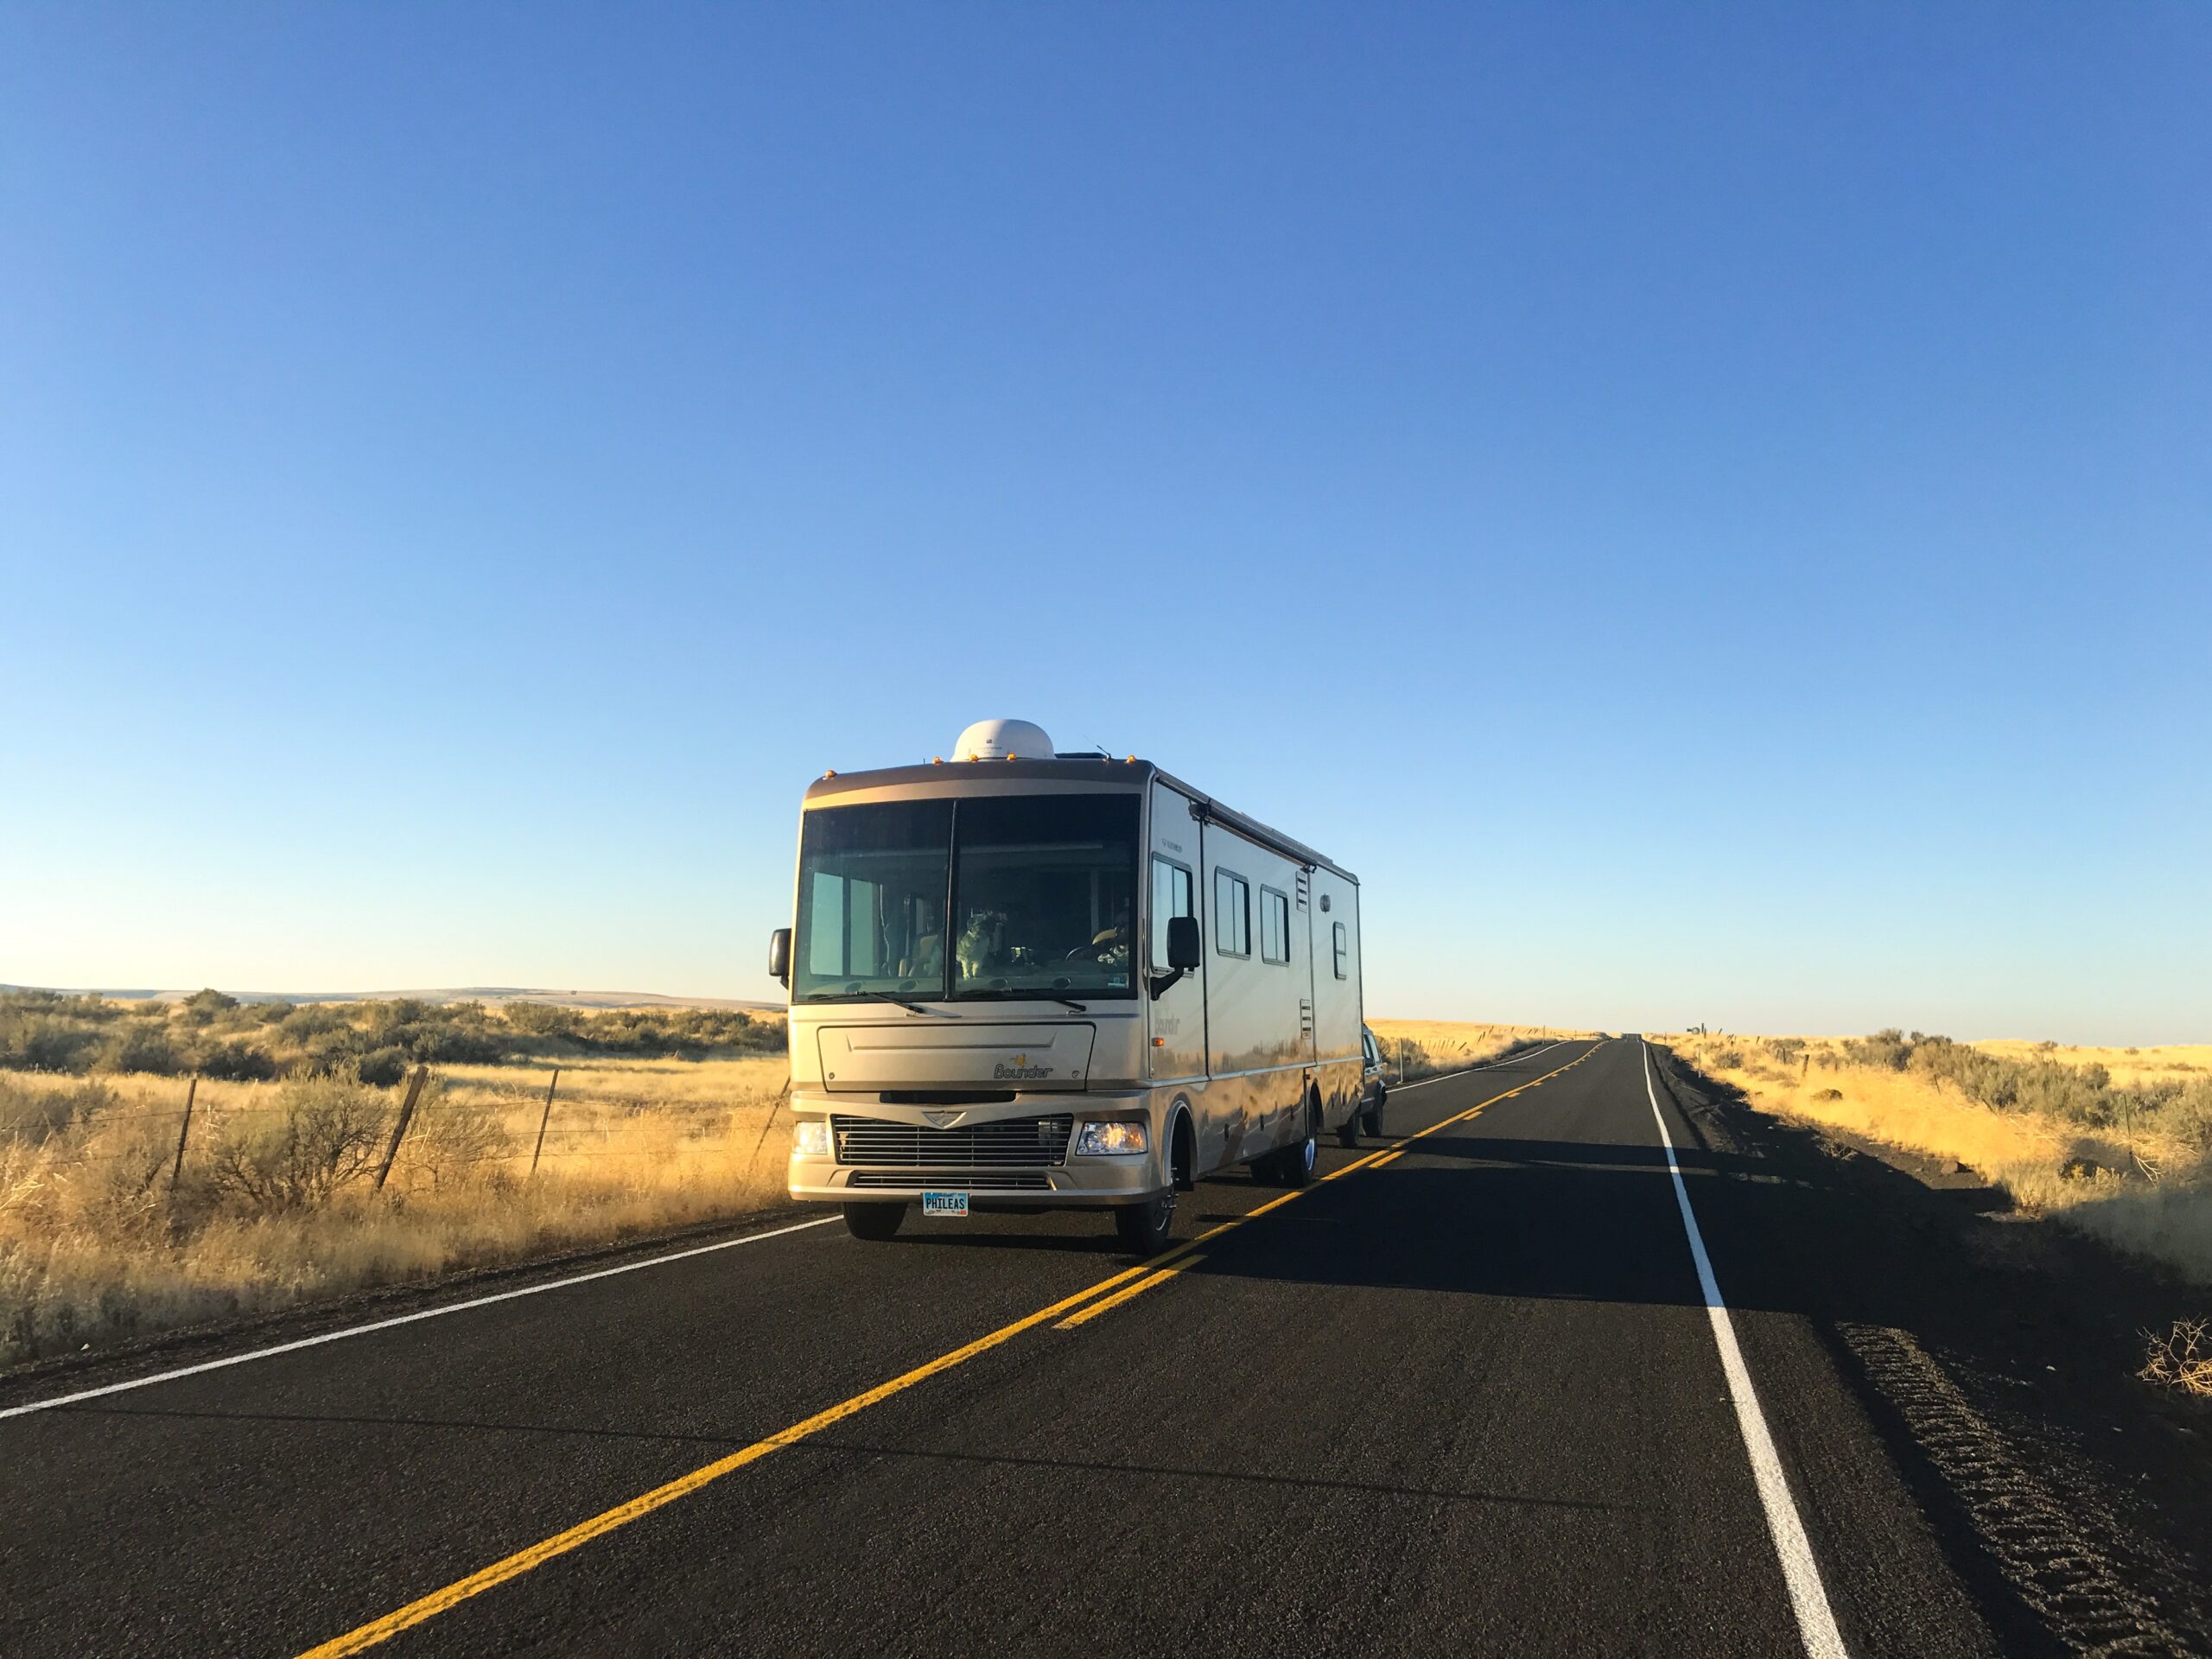 It's helpful to have a plan before your RV even ends up needing repairs.